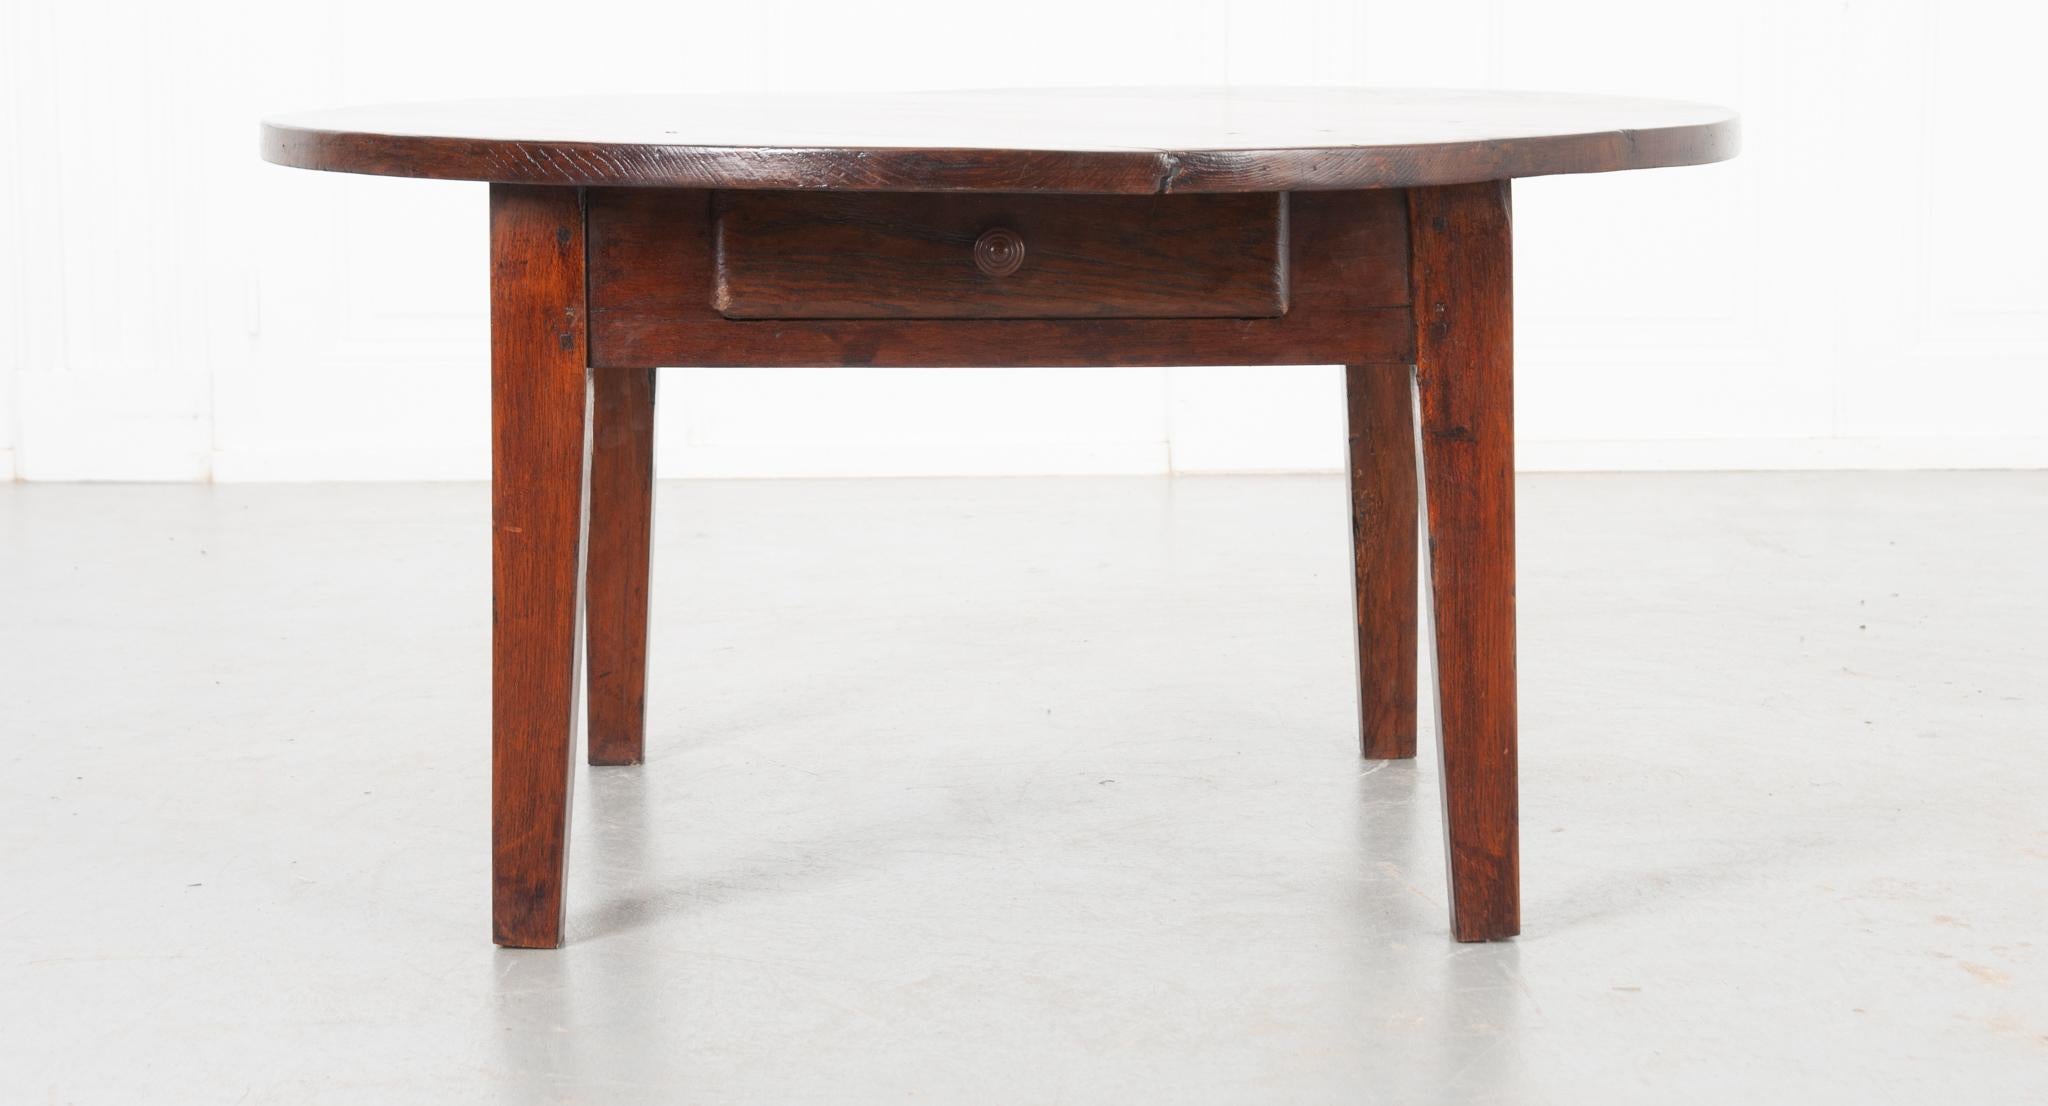 Rustic French 19th Century Oak Coffee Table